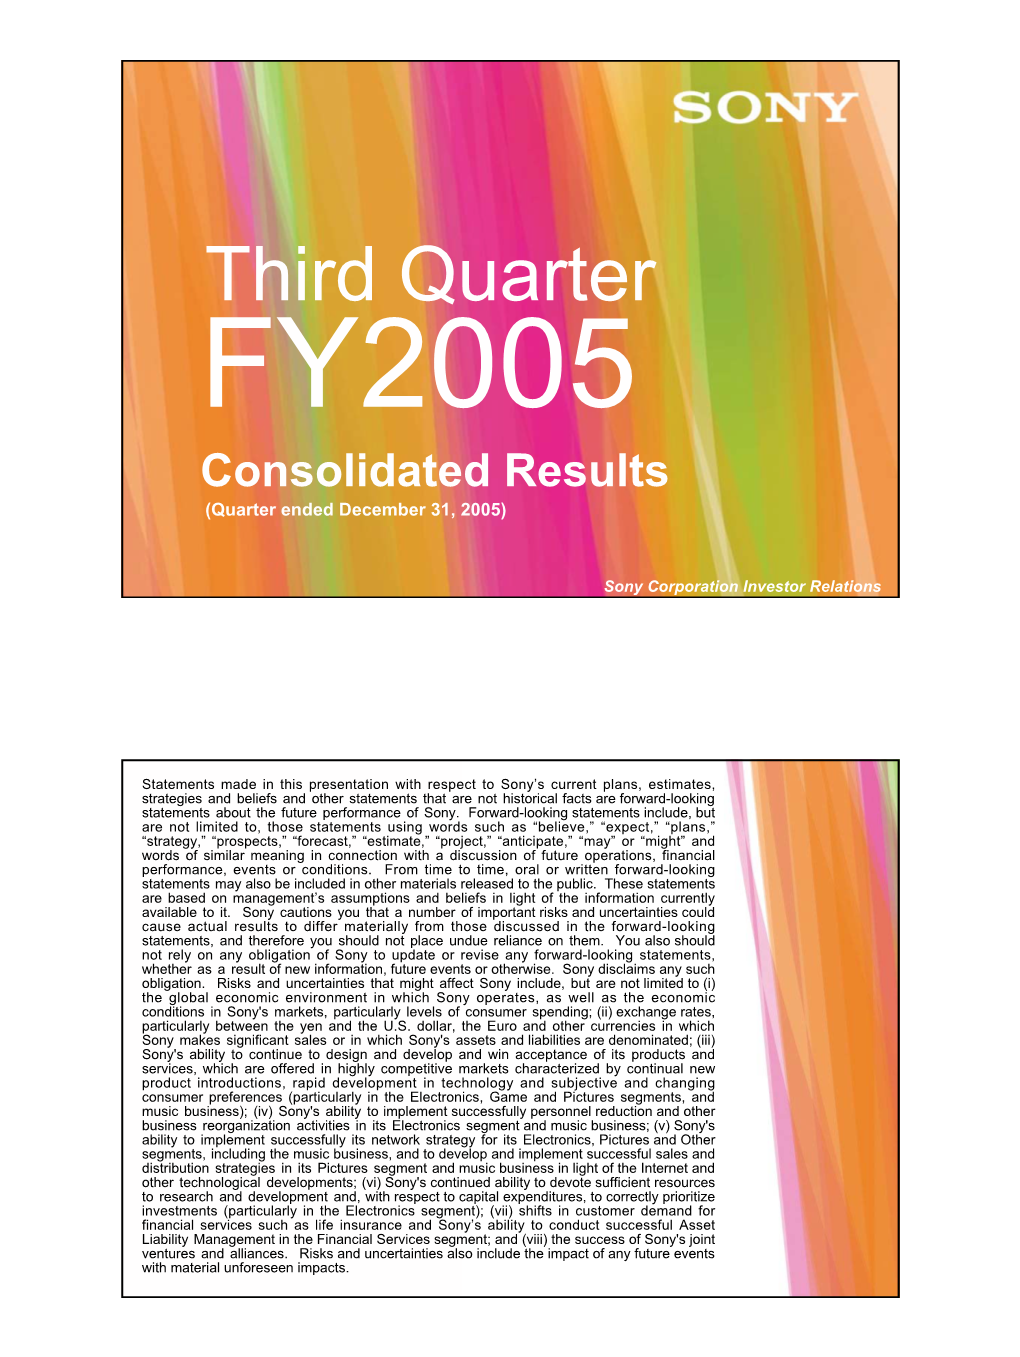 FY2005 Consolidated Results (Quarter Ended December 31, 2005)